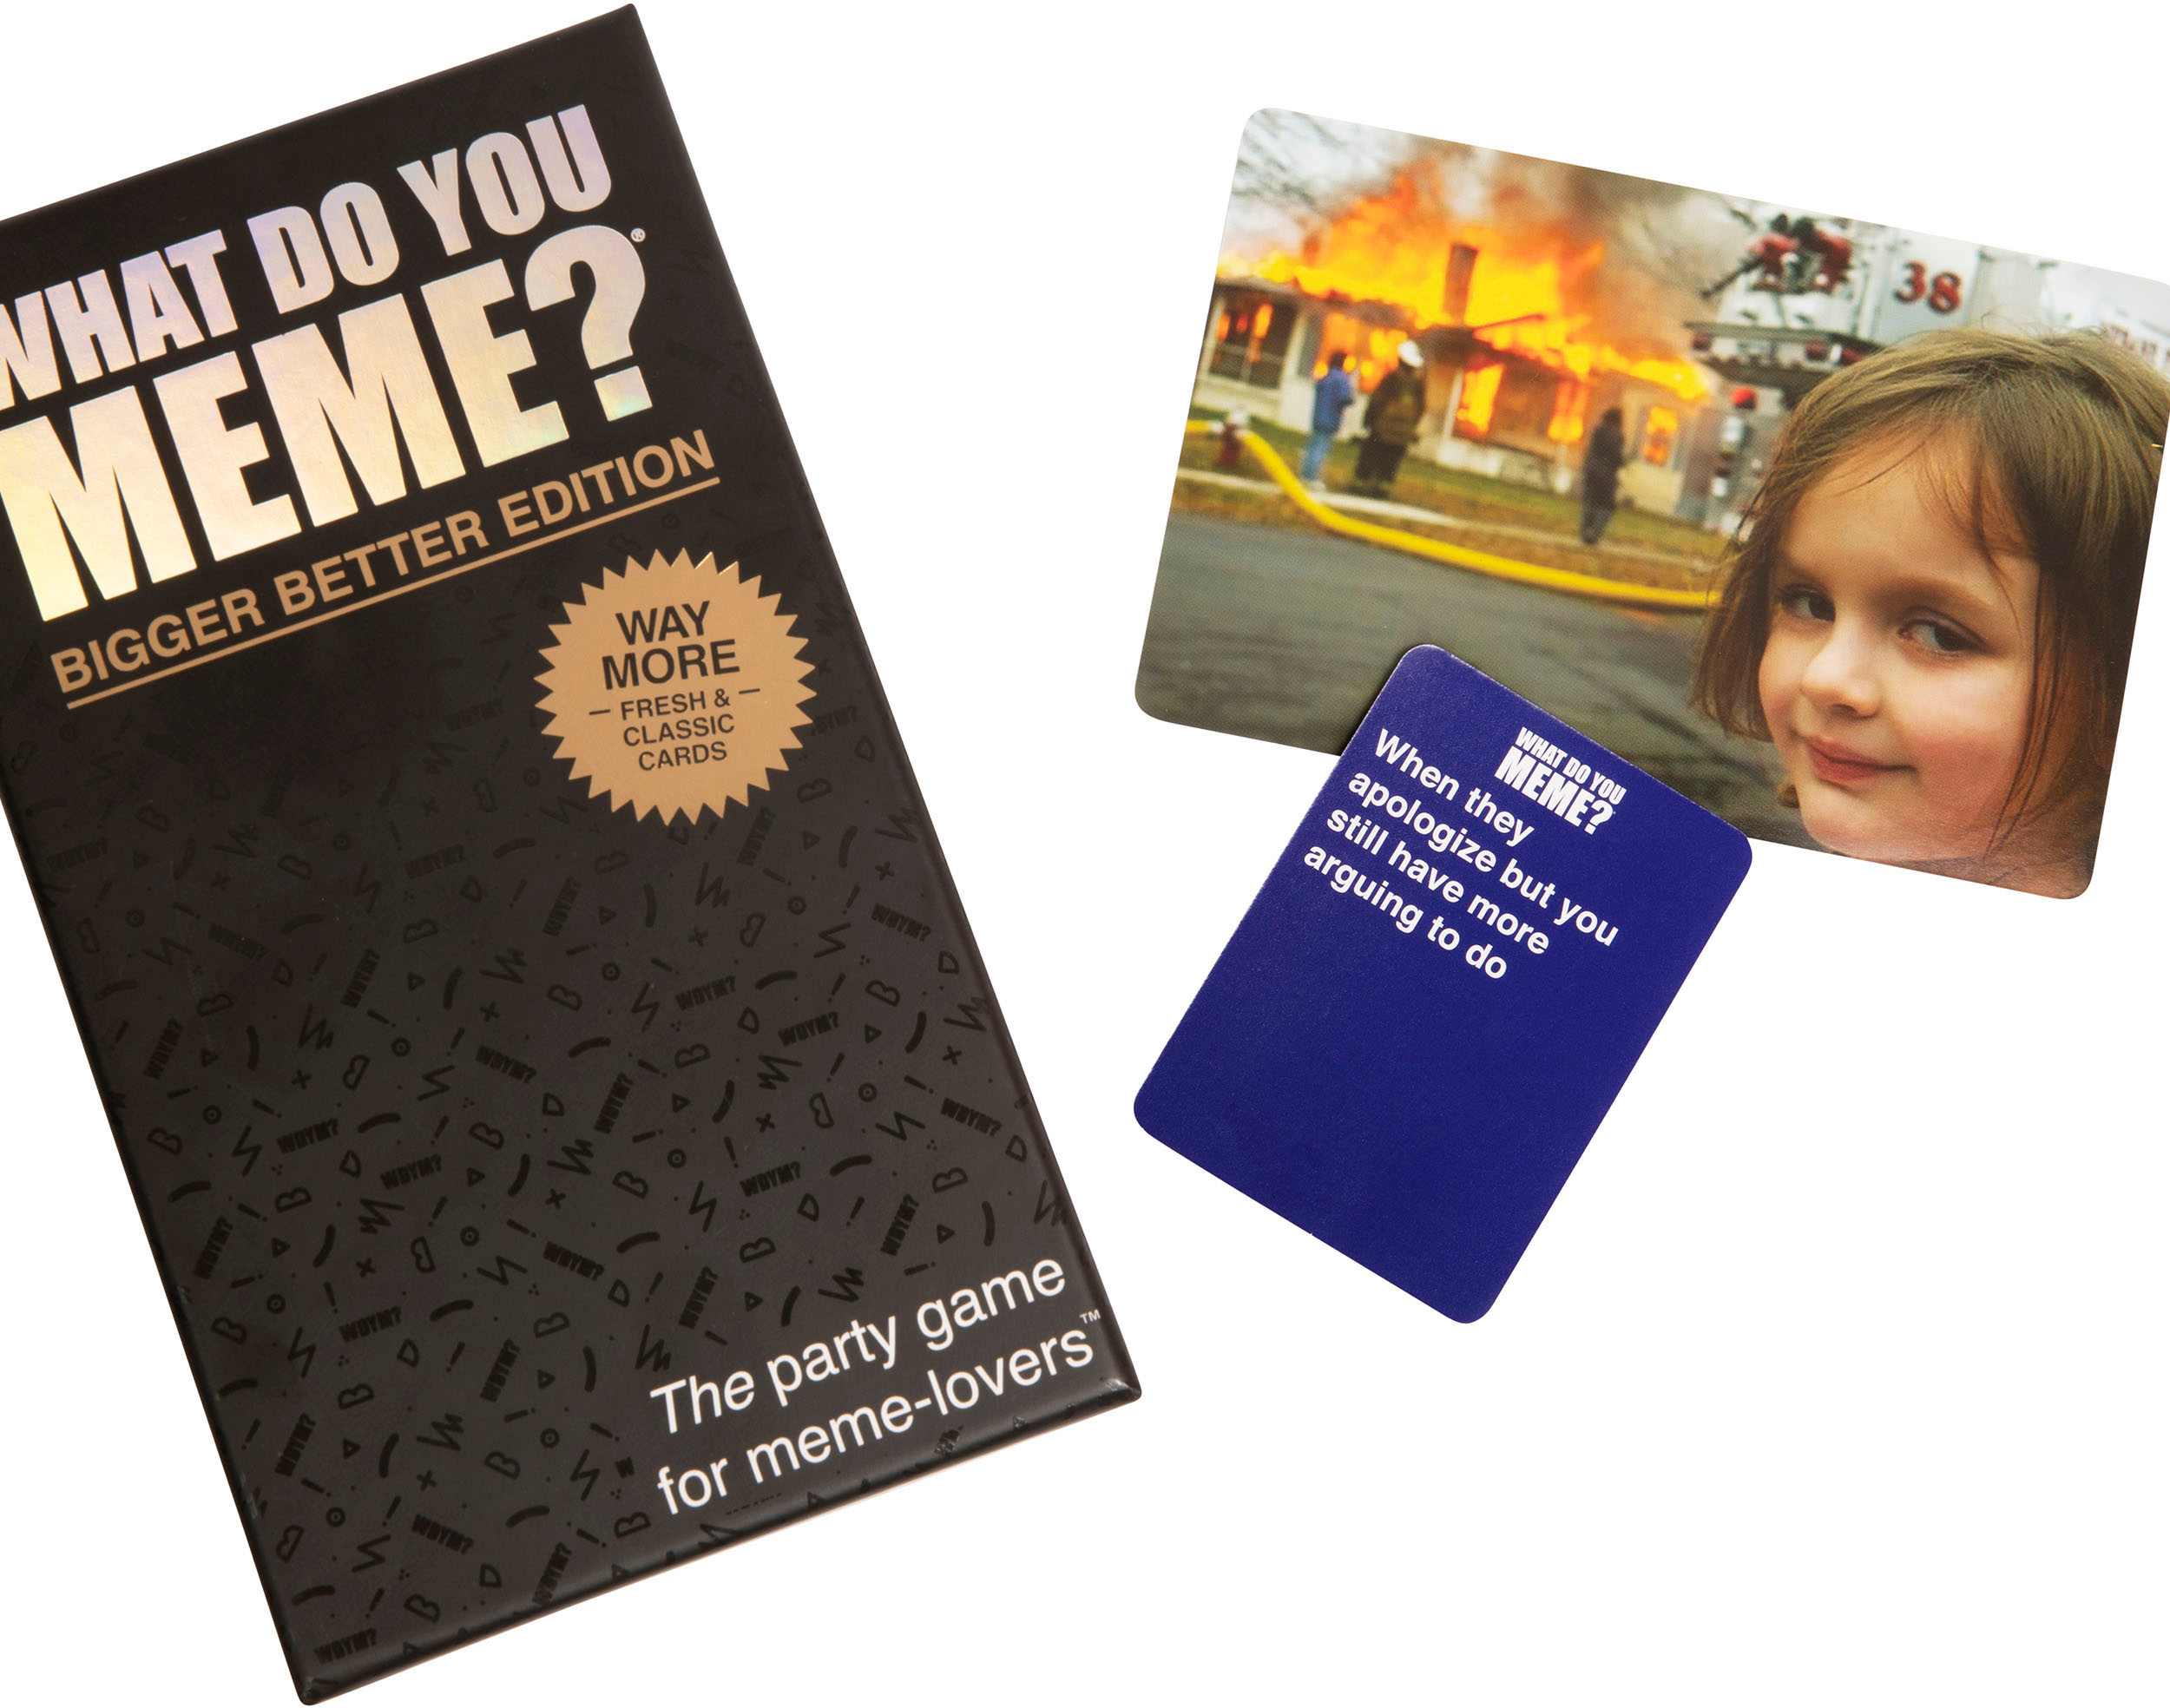 What Do You Meme? Barely Safe for Work Edition Card Game. Good Condition  810816030098